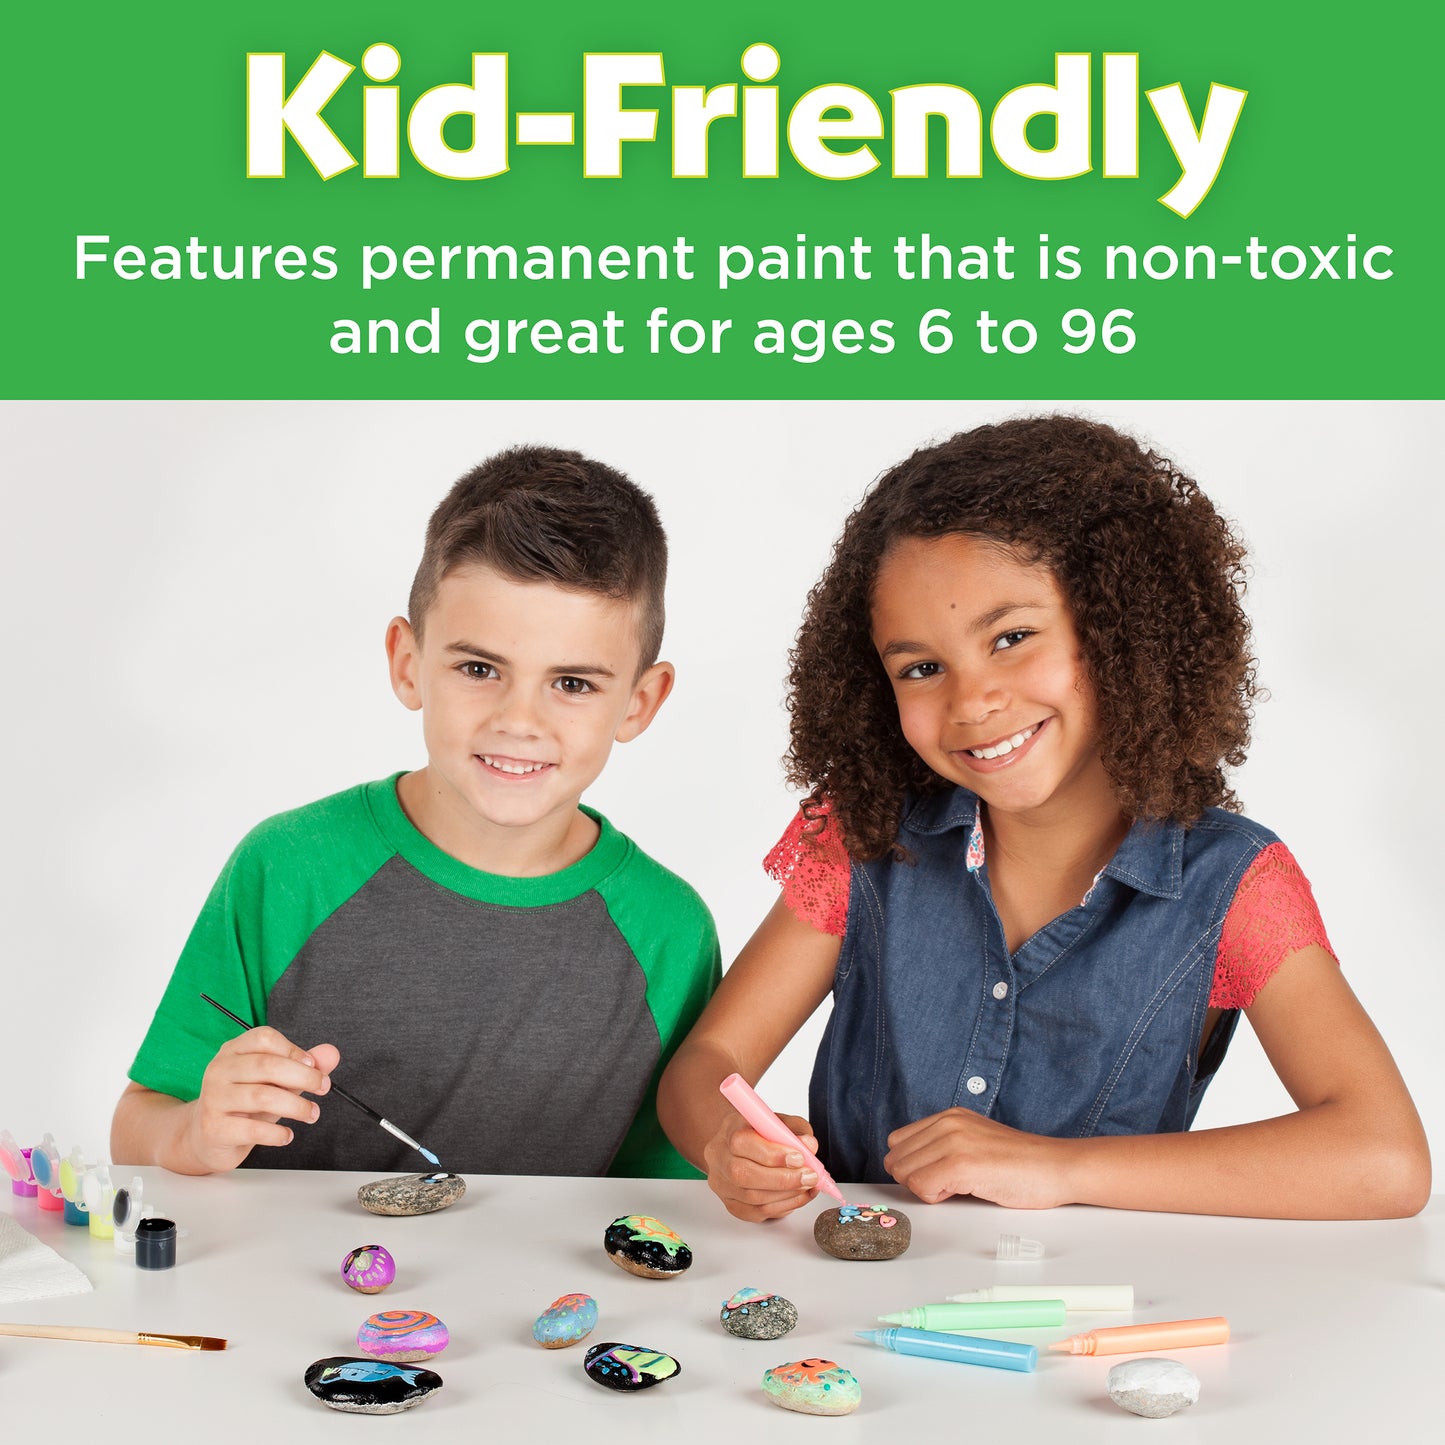 kids-friendly glow in the dark paint that is non-toxic in faber castell kit